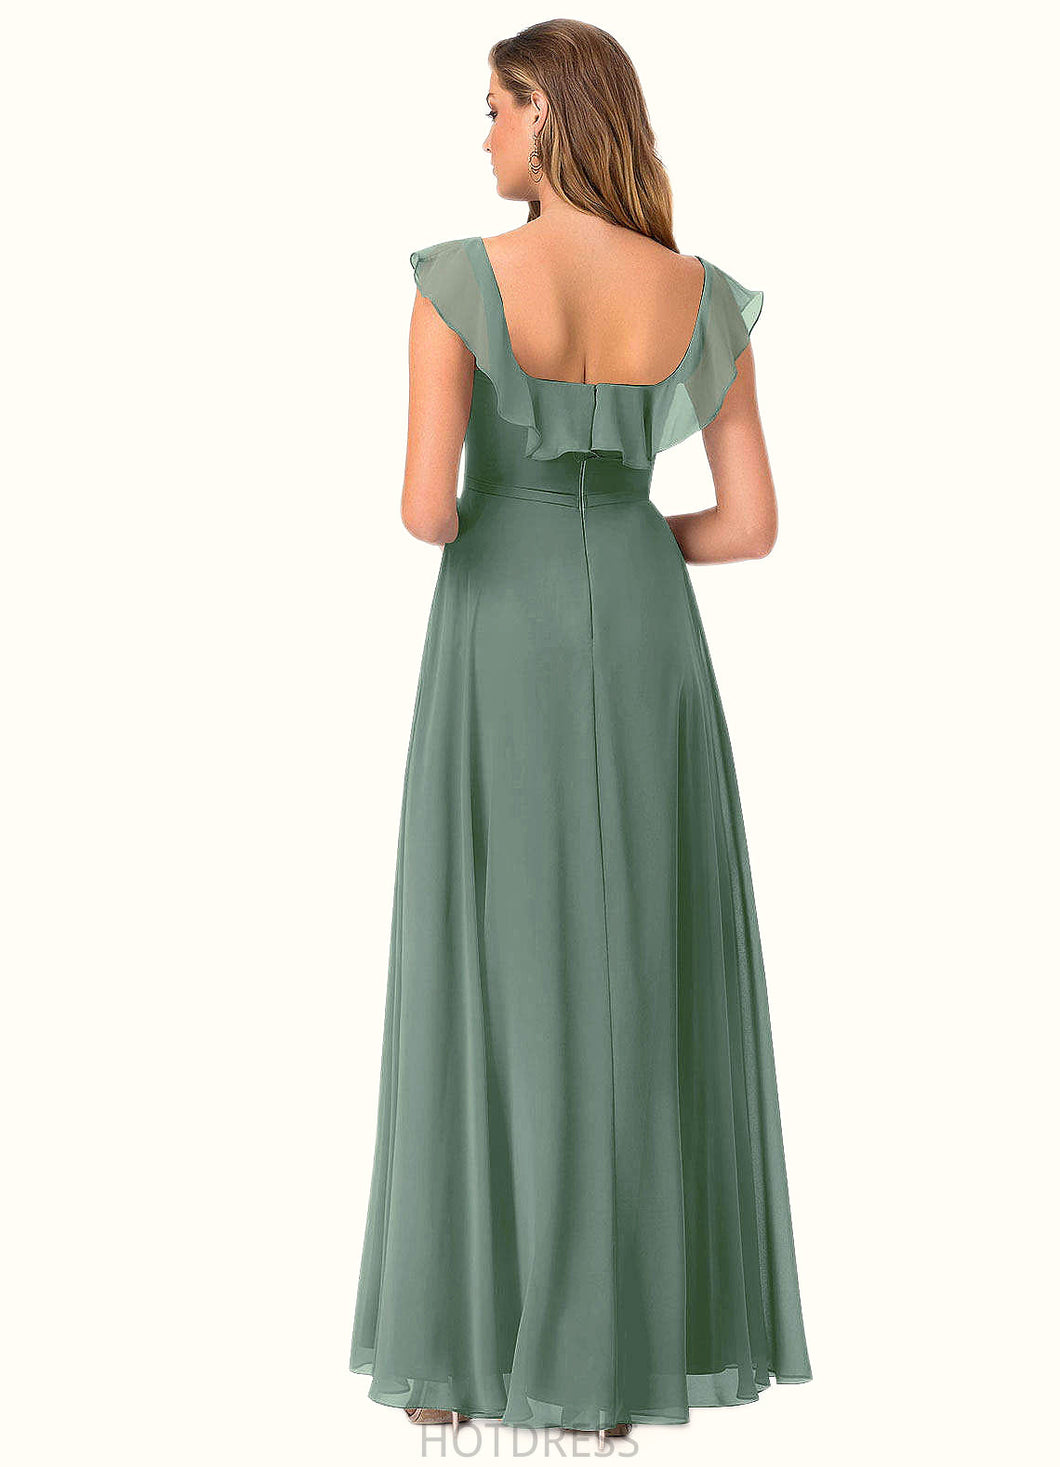 Sonia A-Line Ruched Chiffon Floor-Length Dress P0019657